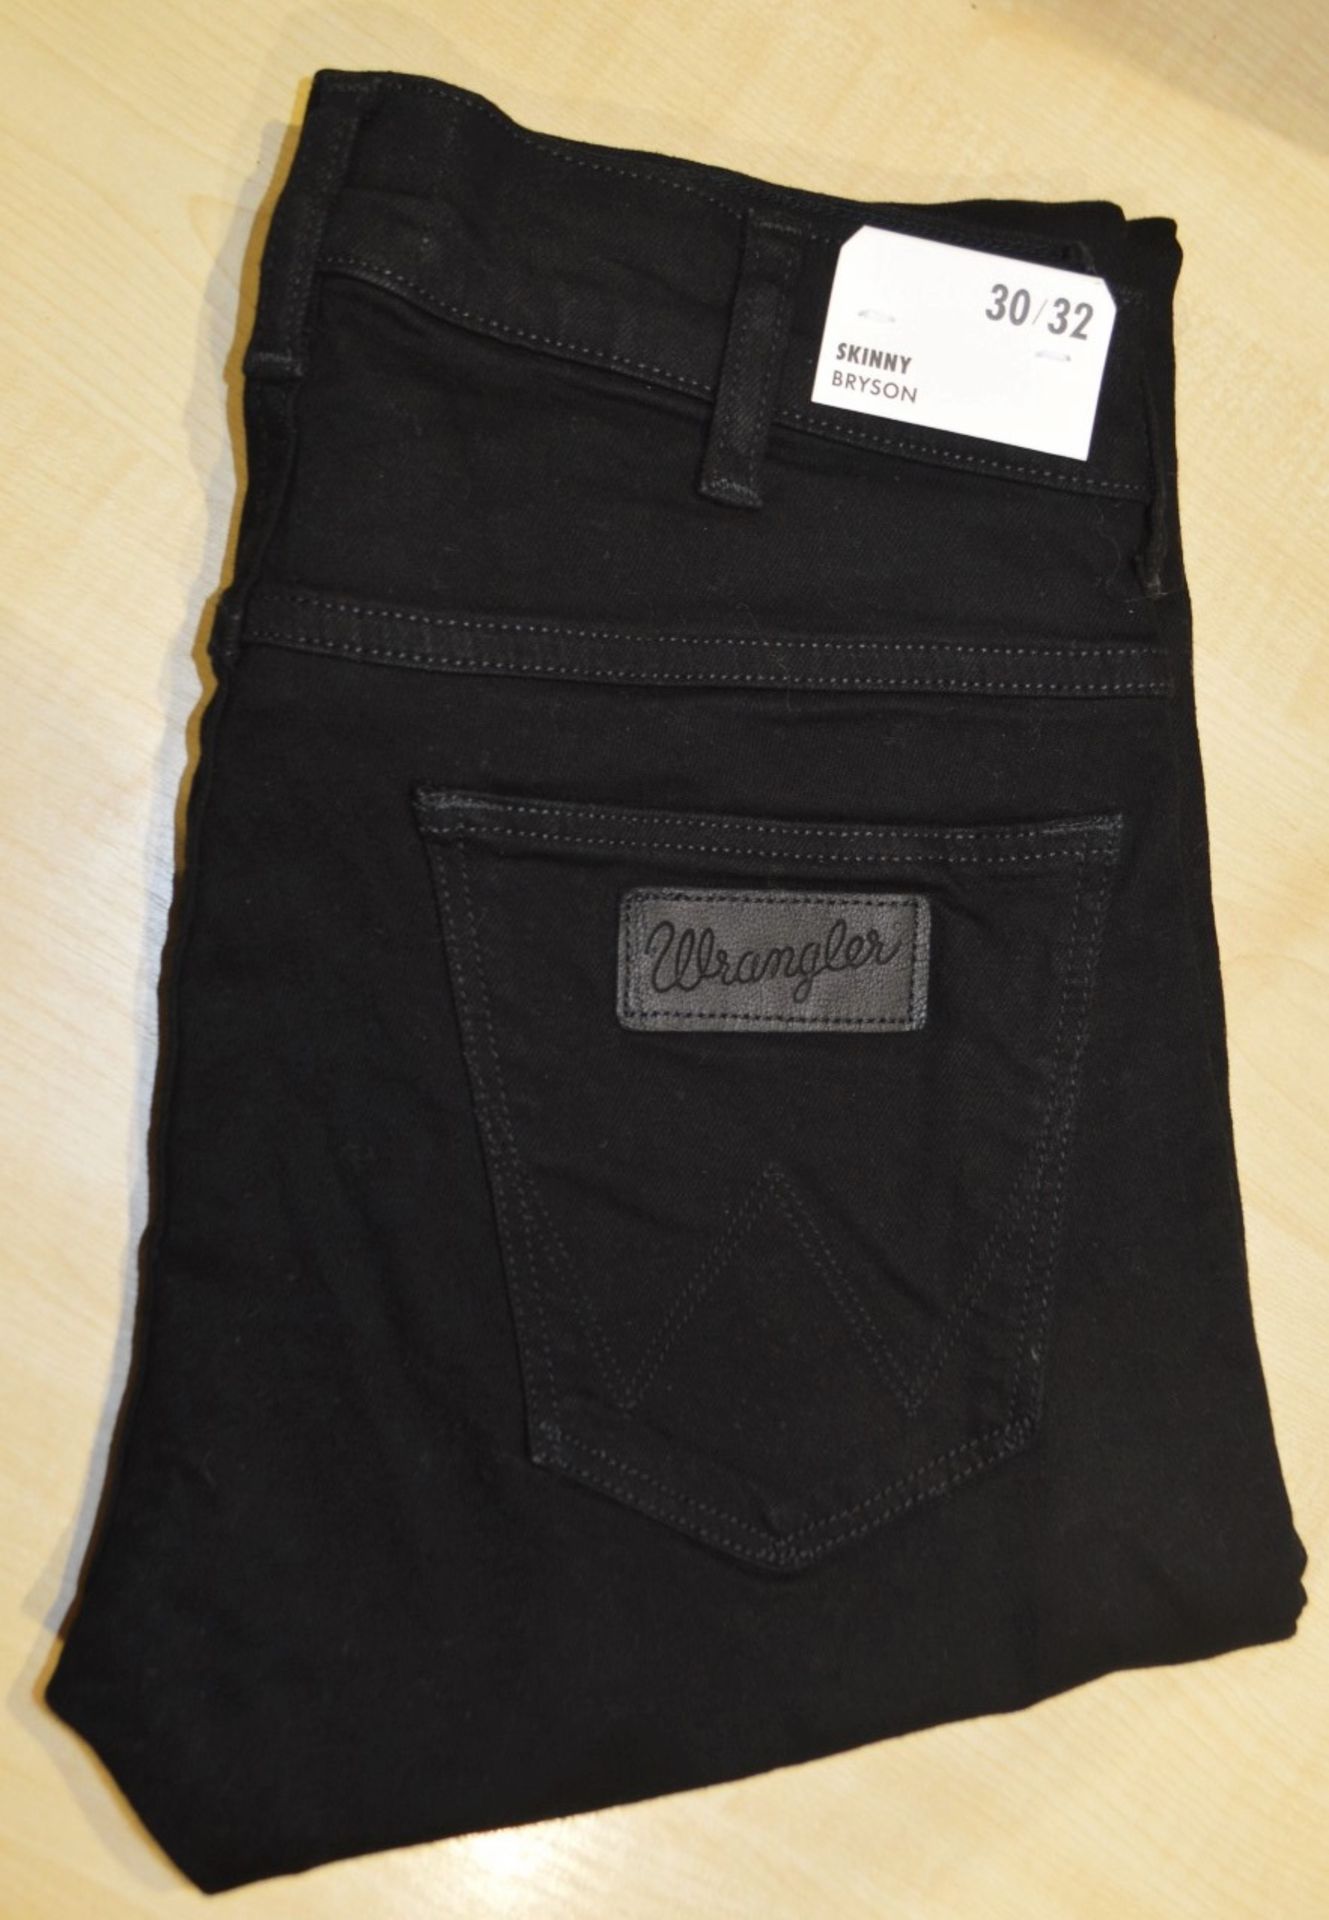 1 x Pair Of Men's Genuine Wrangler Jeans In Black - Size: 30/32 - Preowned, Like New With Tags - - Image 7 of 10